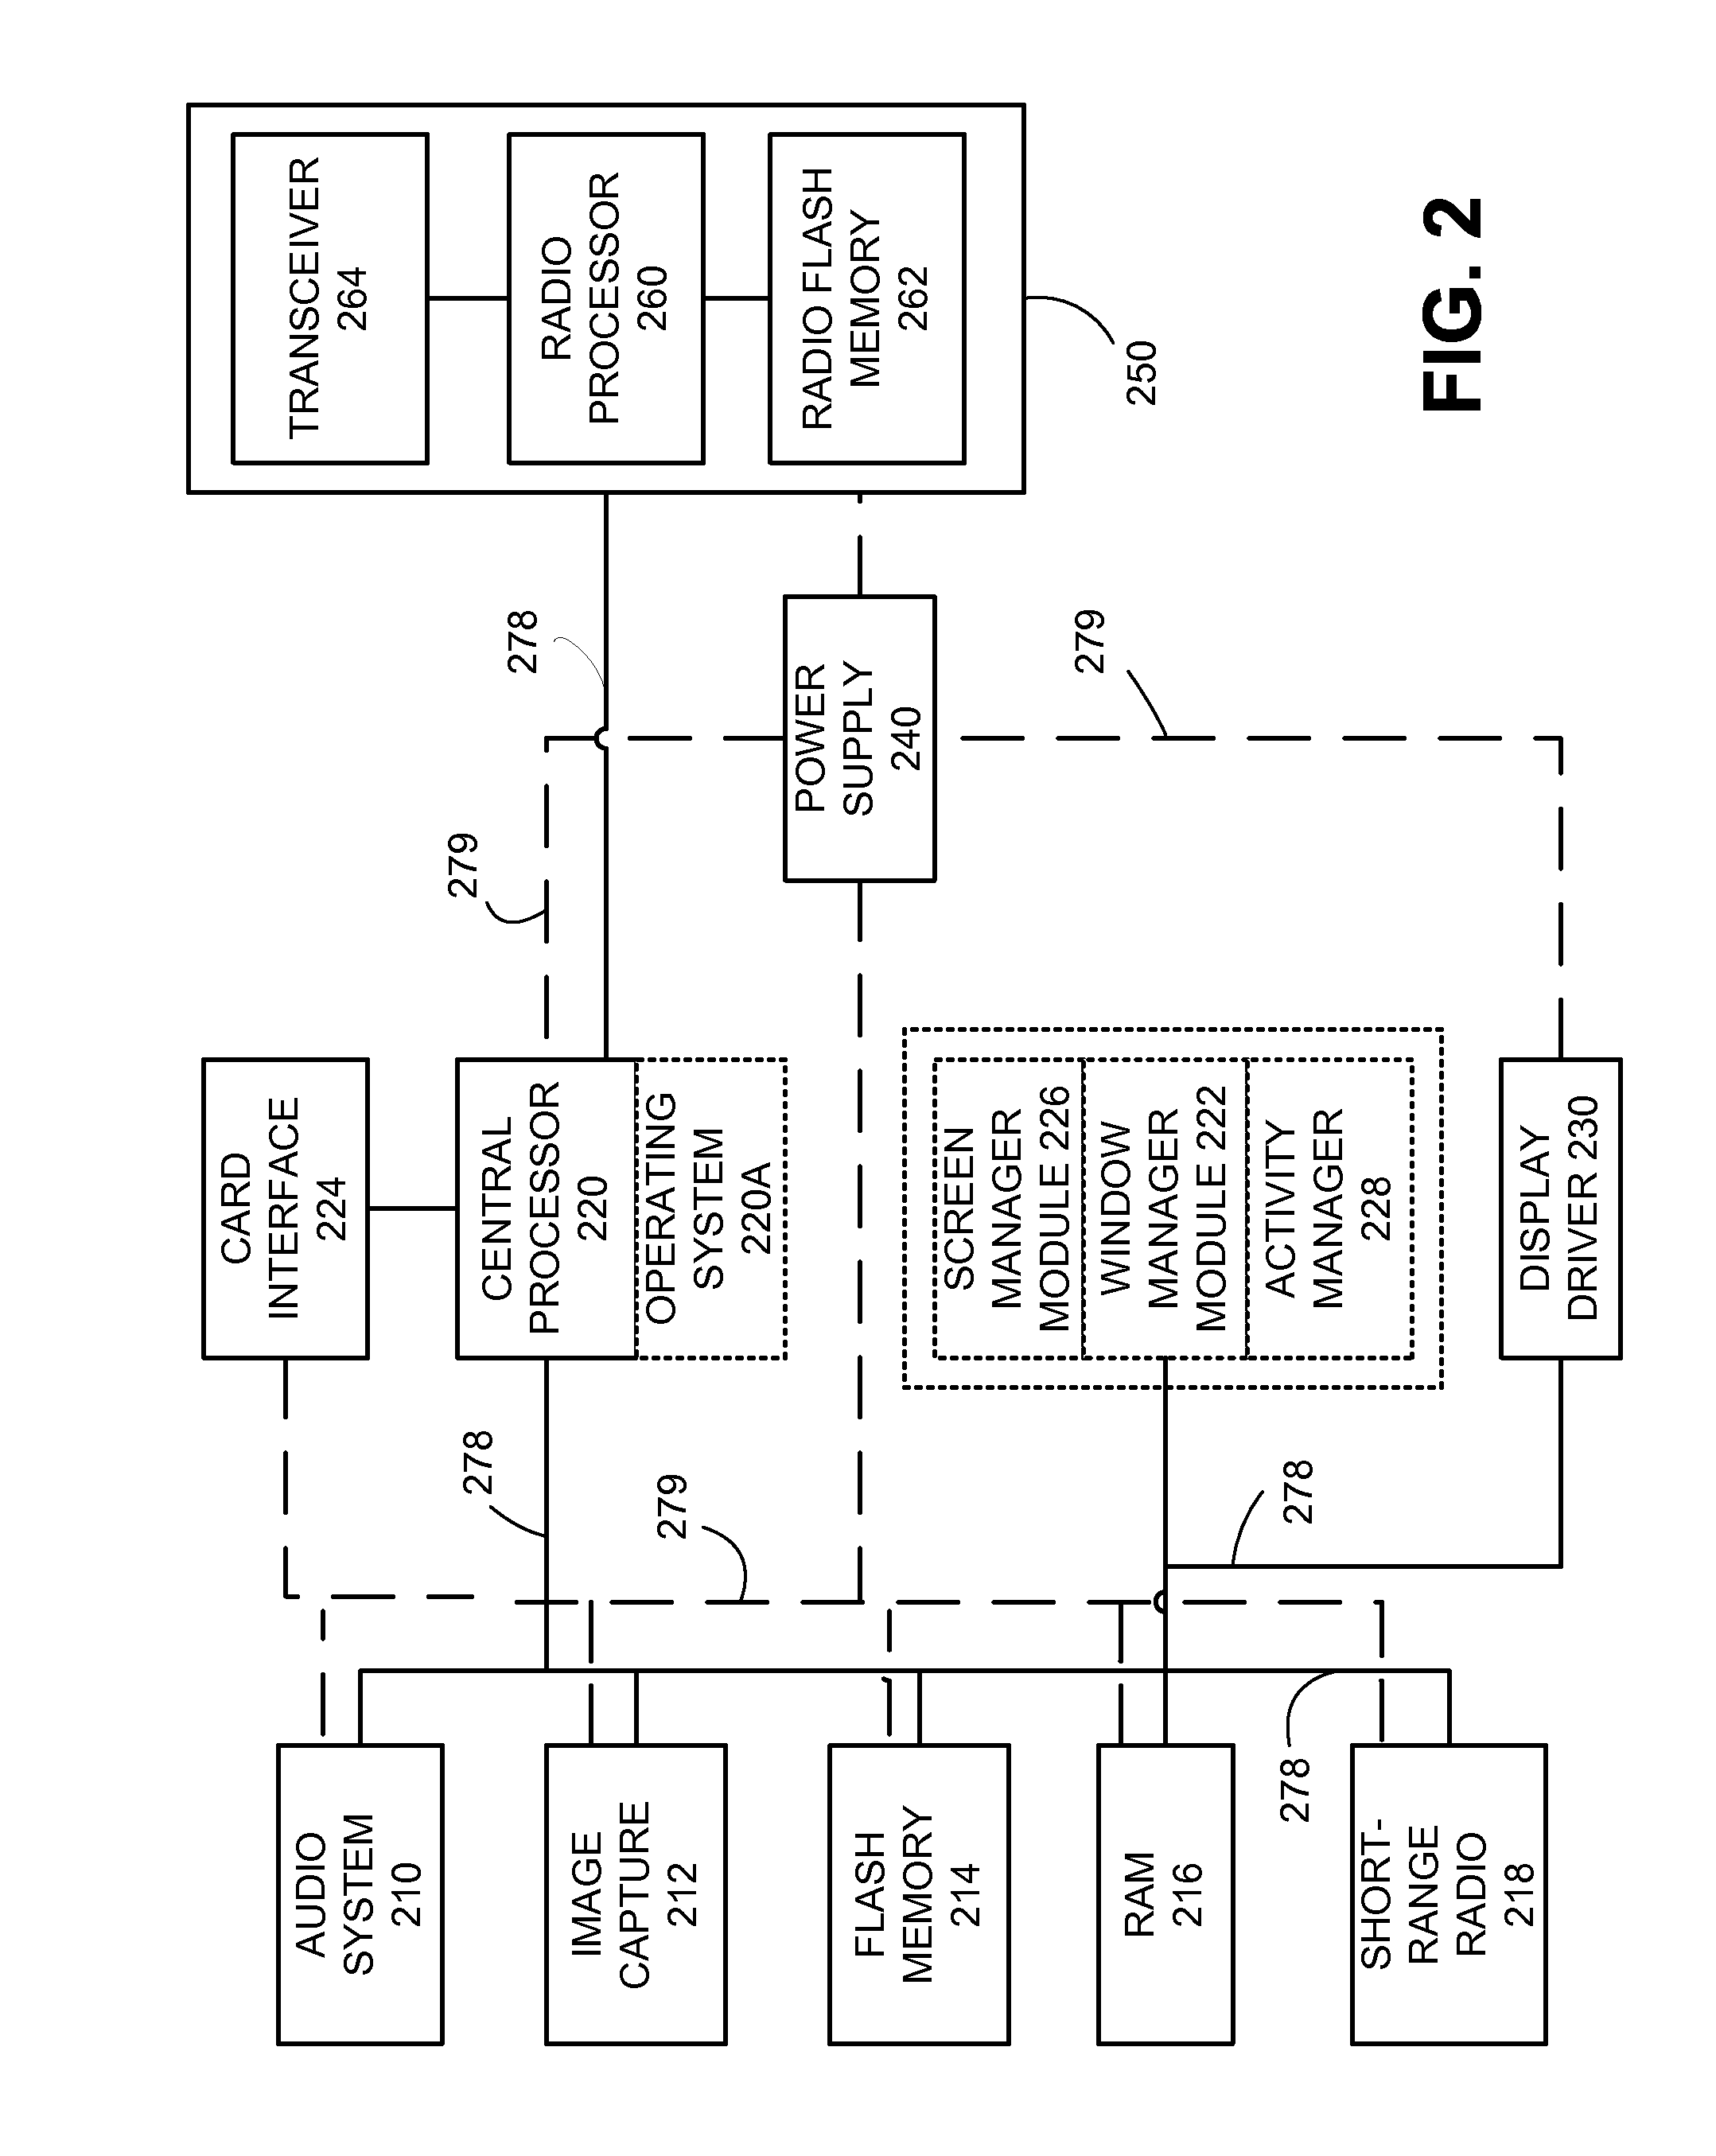 Mobile Computing Device Activity Manager